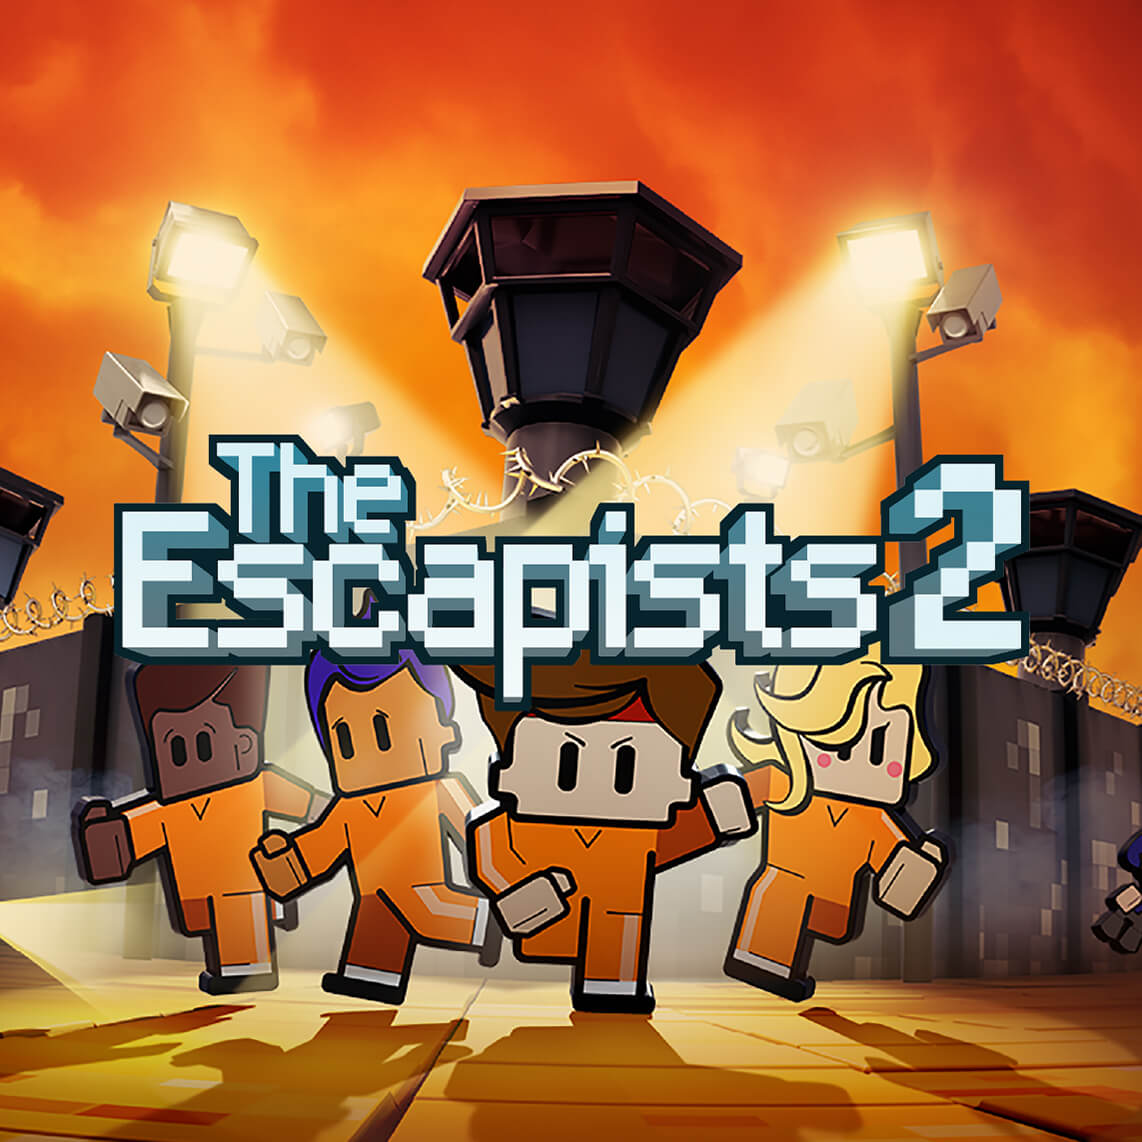 The Escapists 2: Special Edition now available on Xbox One